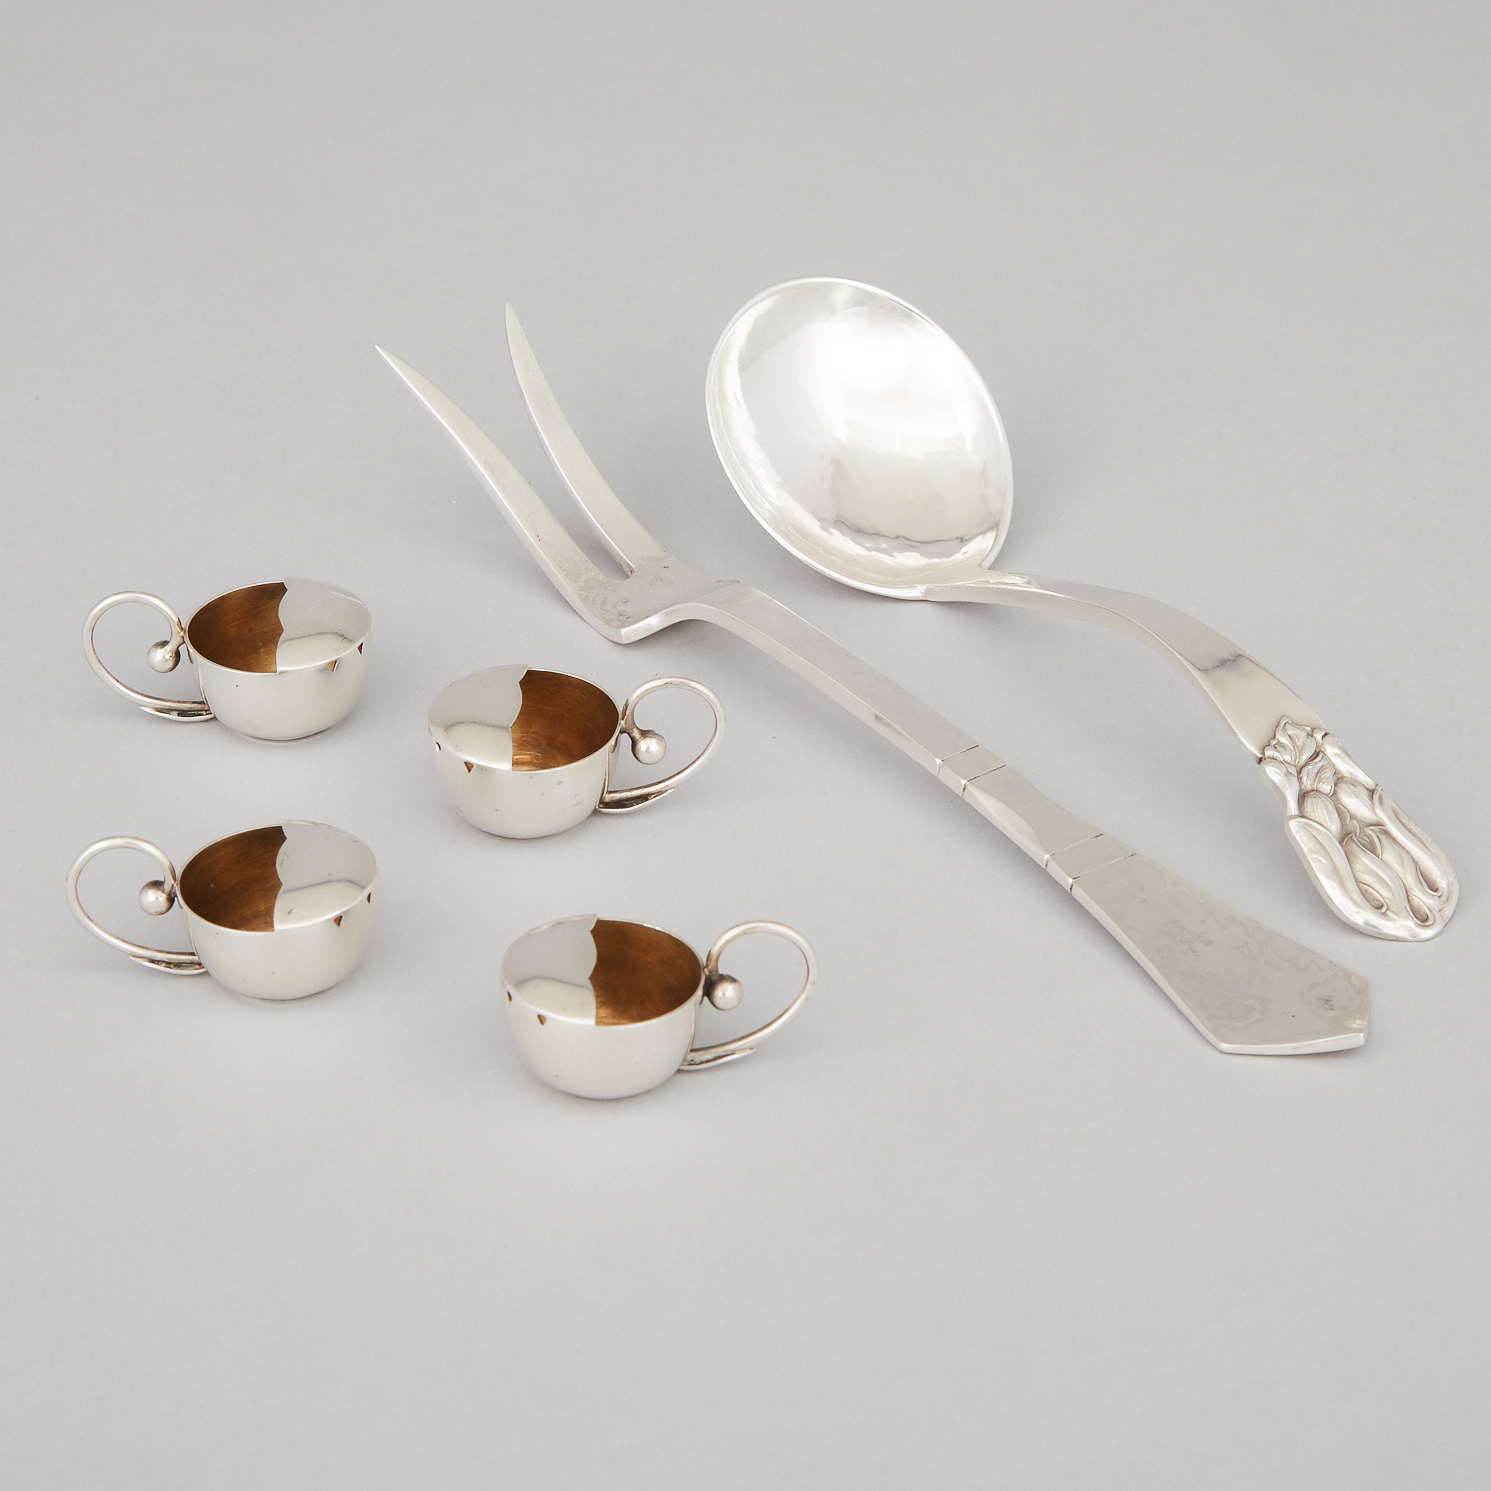 Canadian Silver Serving Fork, Sauce Ladle and Four Salts, Carl Poul Petersen, Montreal, Que., mid-20th century